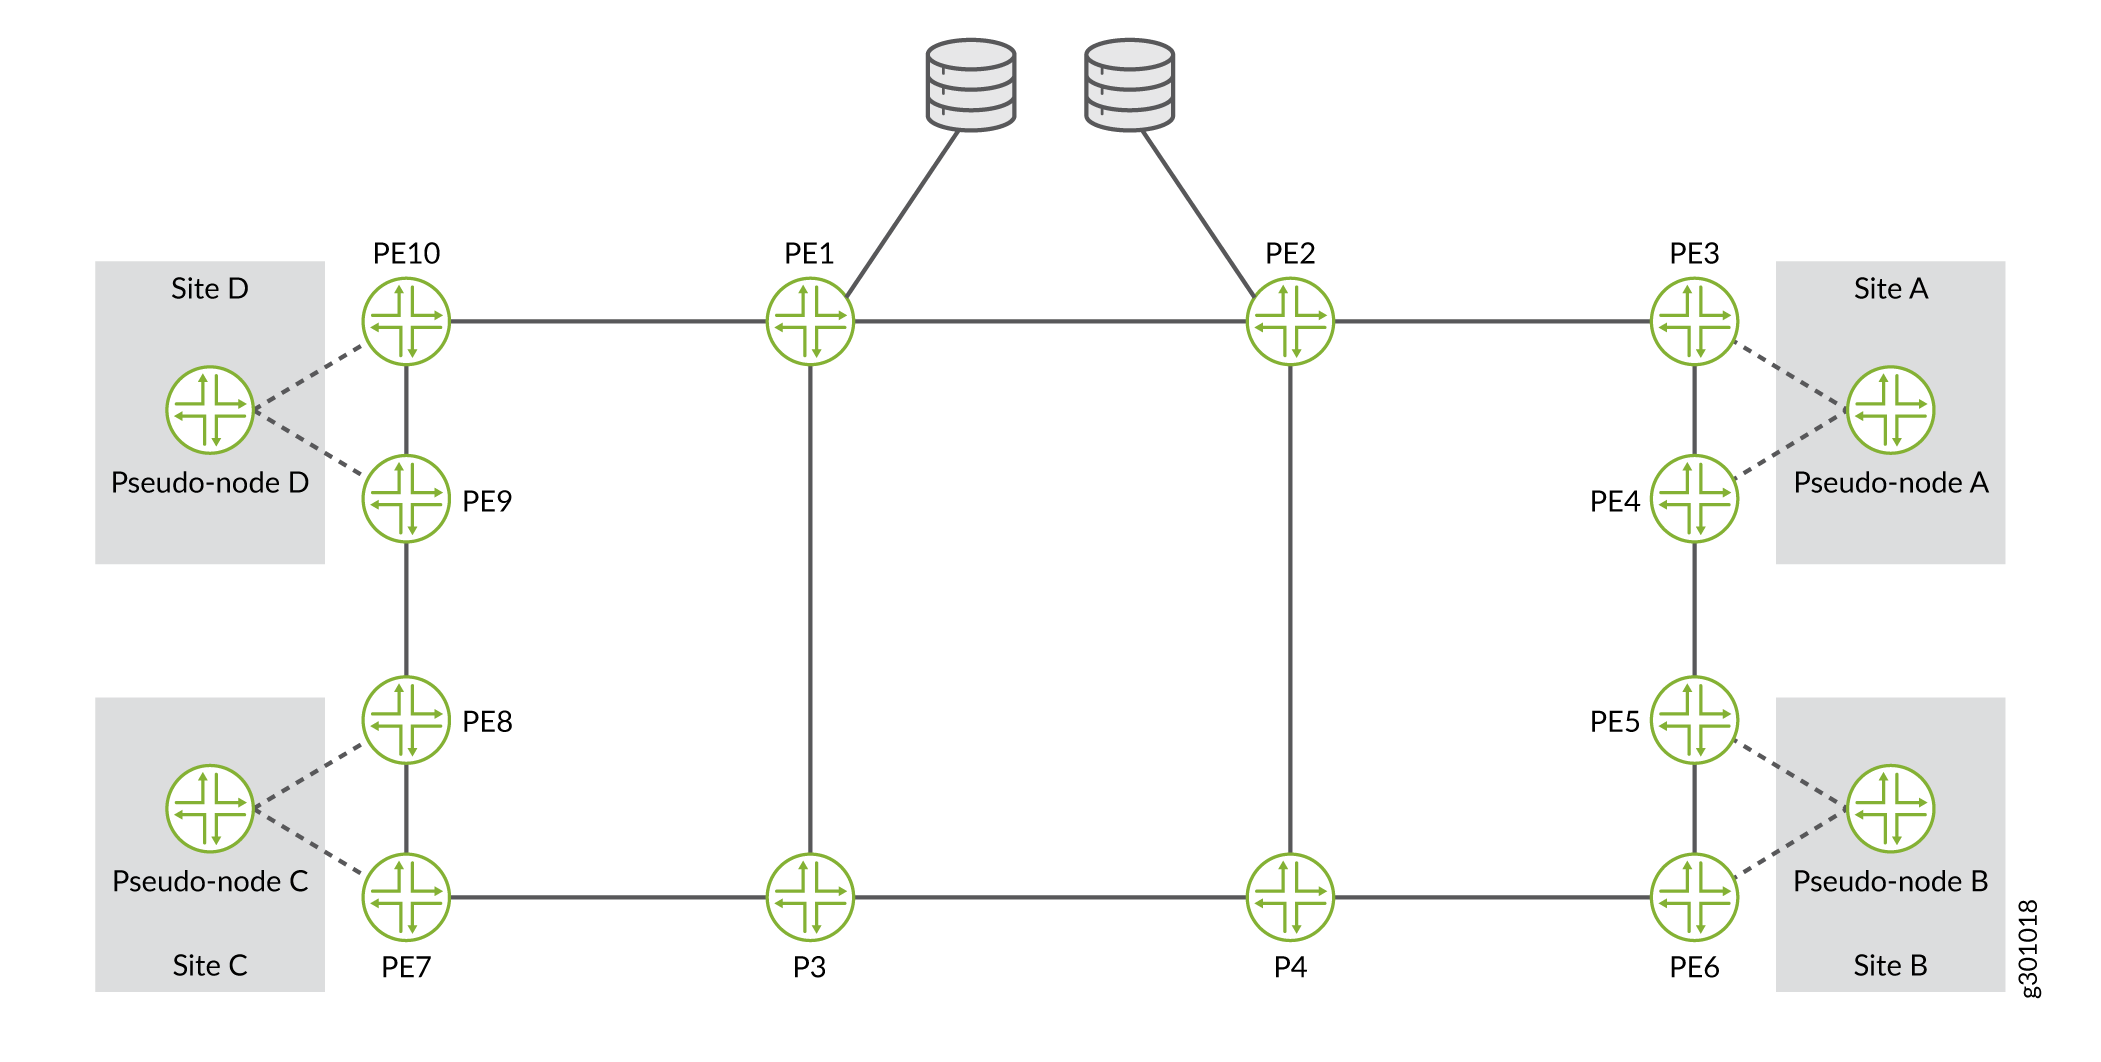 Diverse PE to CE Links Topology with Pseudo-Nodes